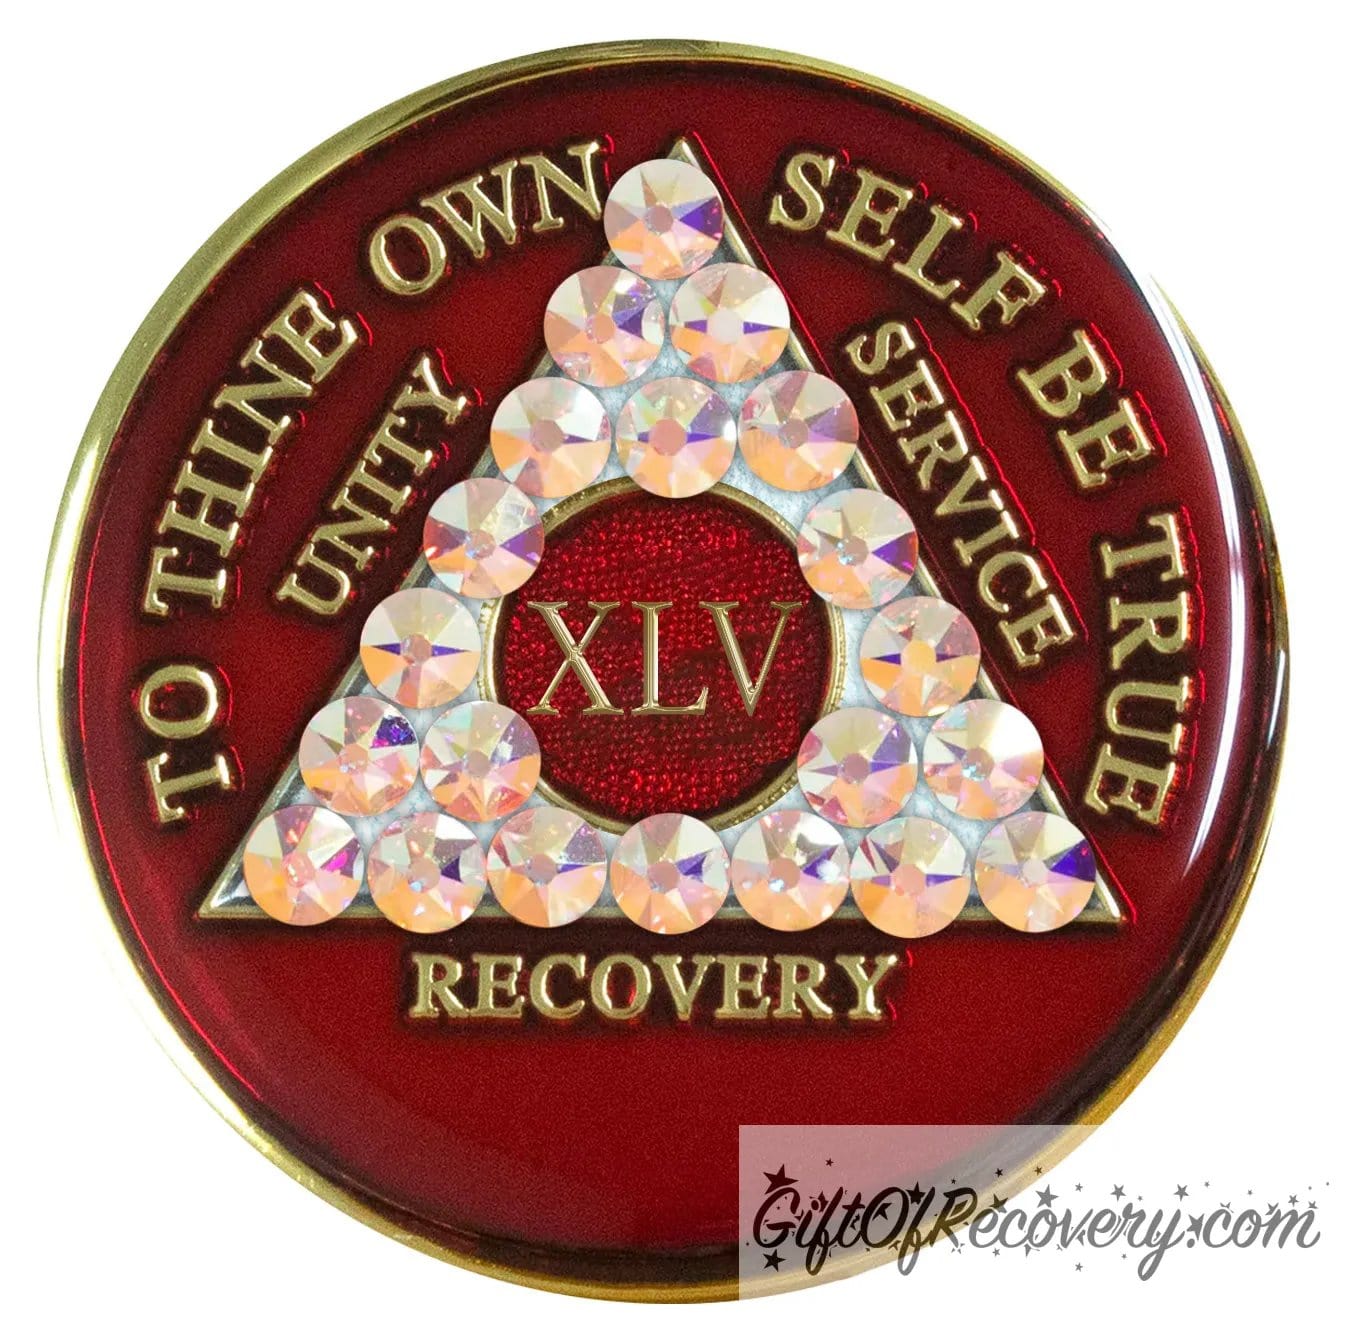 45 year AA medallion ruby red with 21 Aurora Borealis genuine crystals in the shape of the triangle and to thine own self be true, unity, service, recovery, and roman numeral are embossed with 14k gold-plated brass, the medallion is sealed with resin for a shiny finish that lasts.